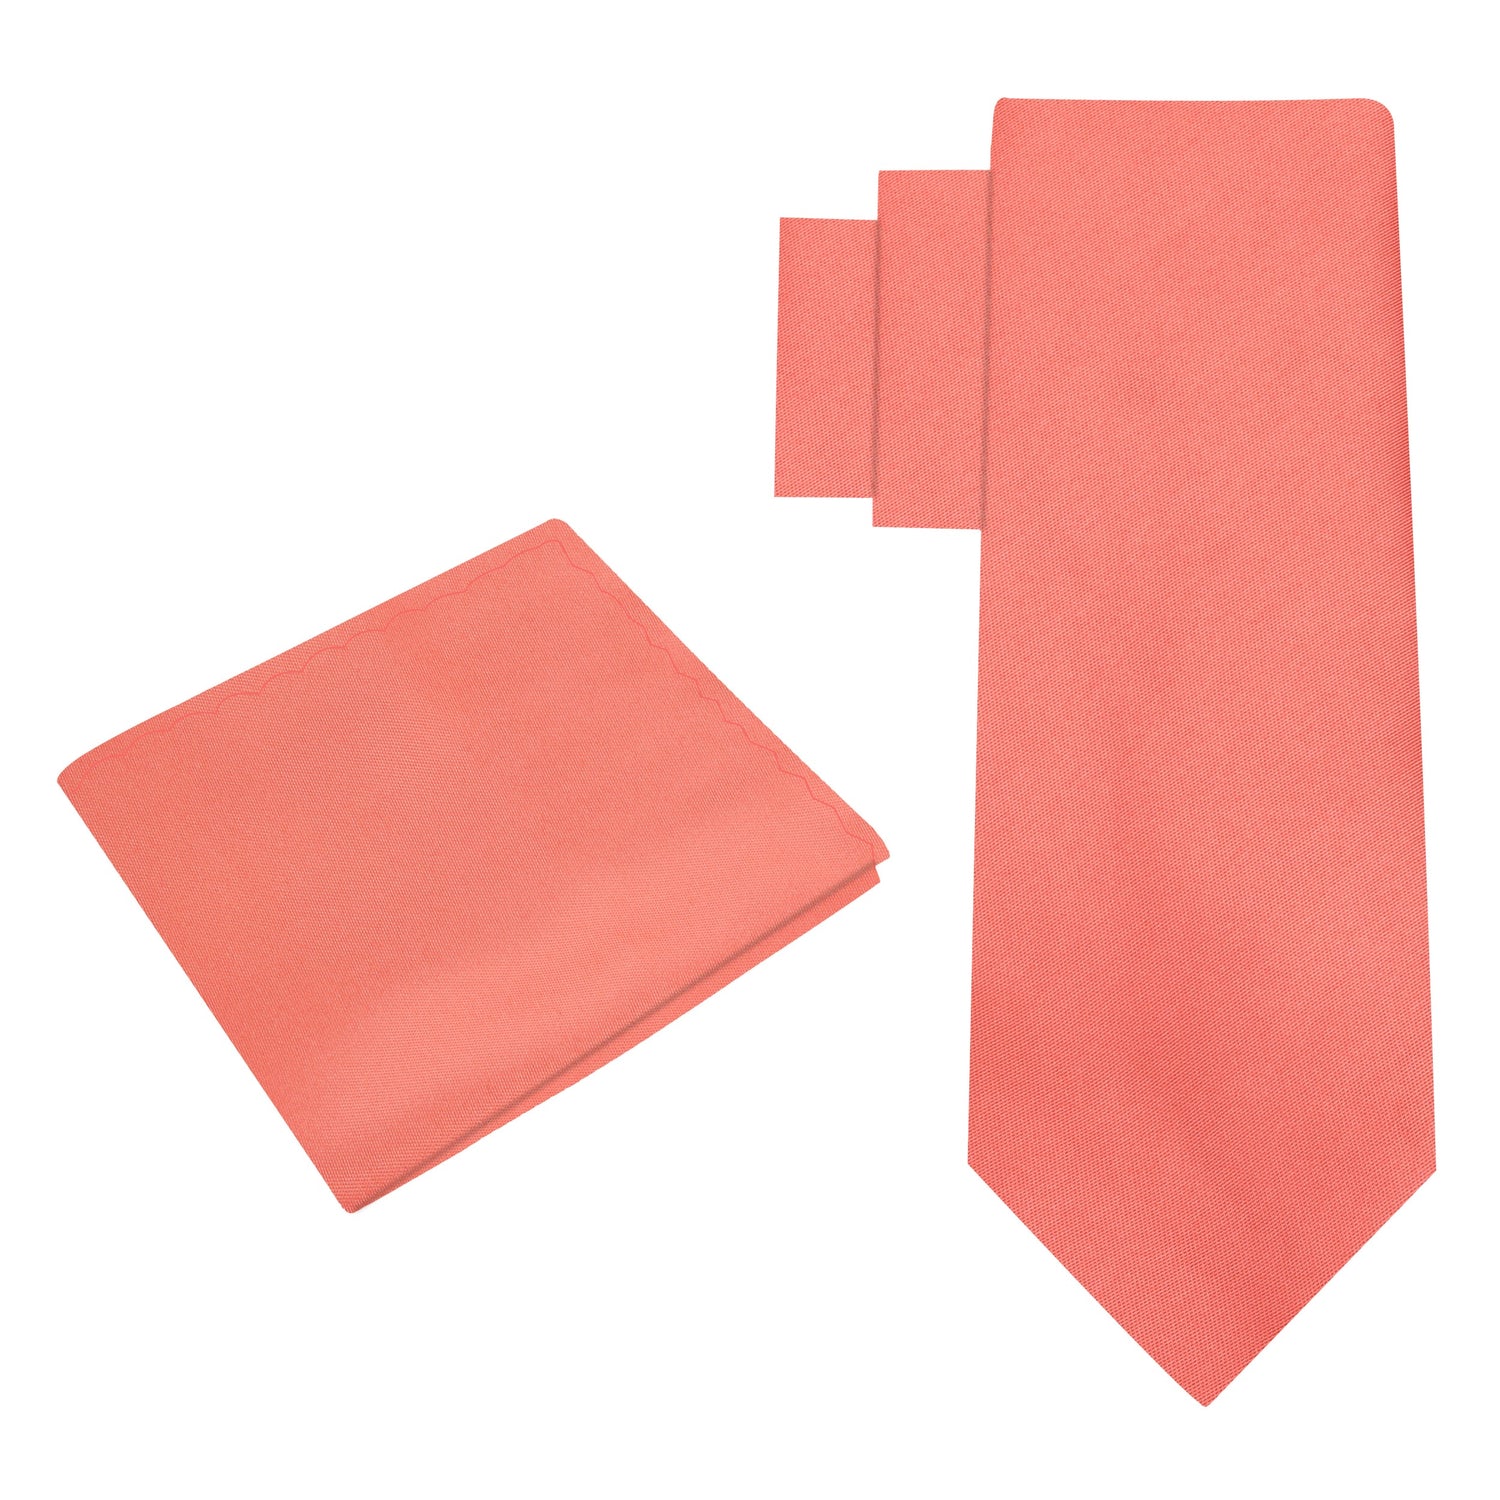 Alt View: Solid Glossy Rich Coral Silk Necktie and Pocket Square